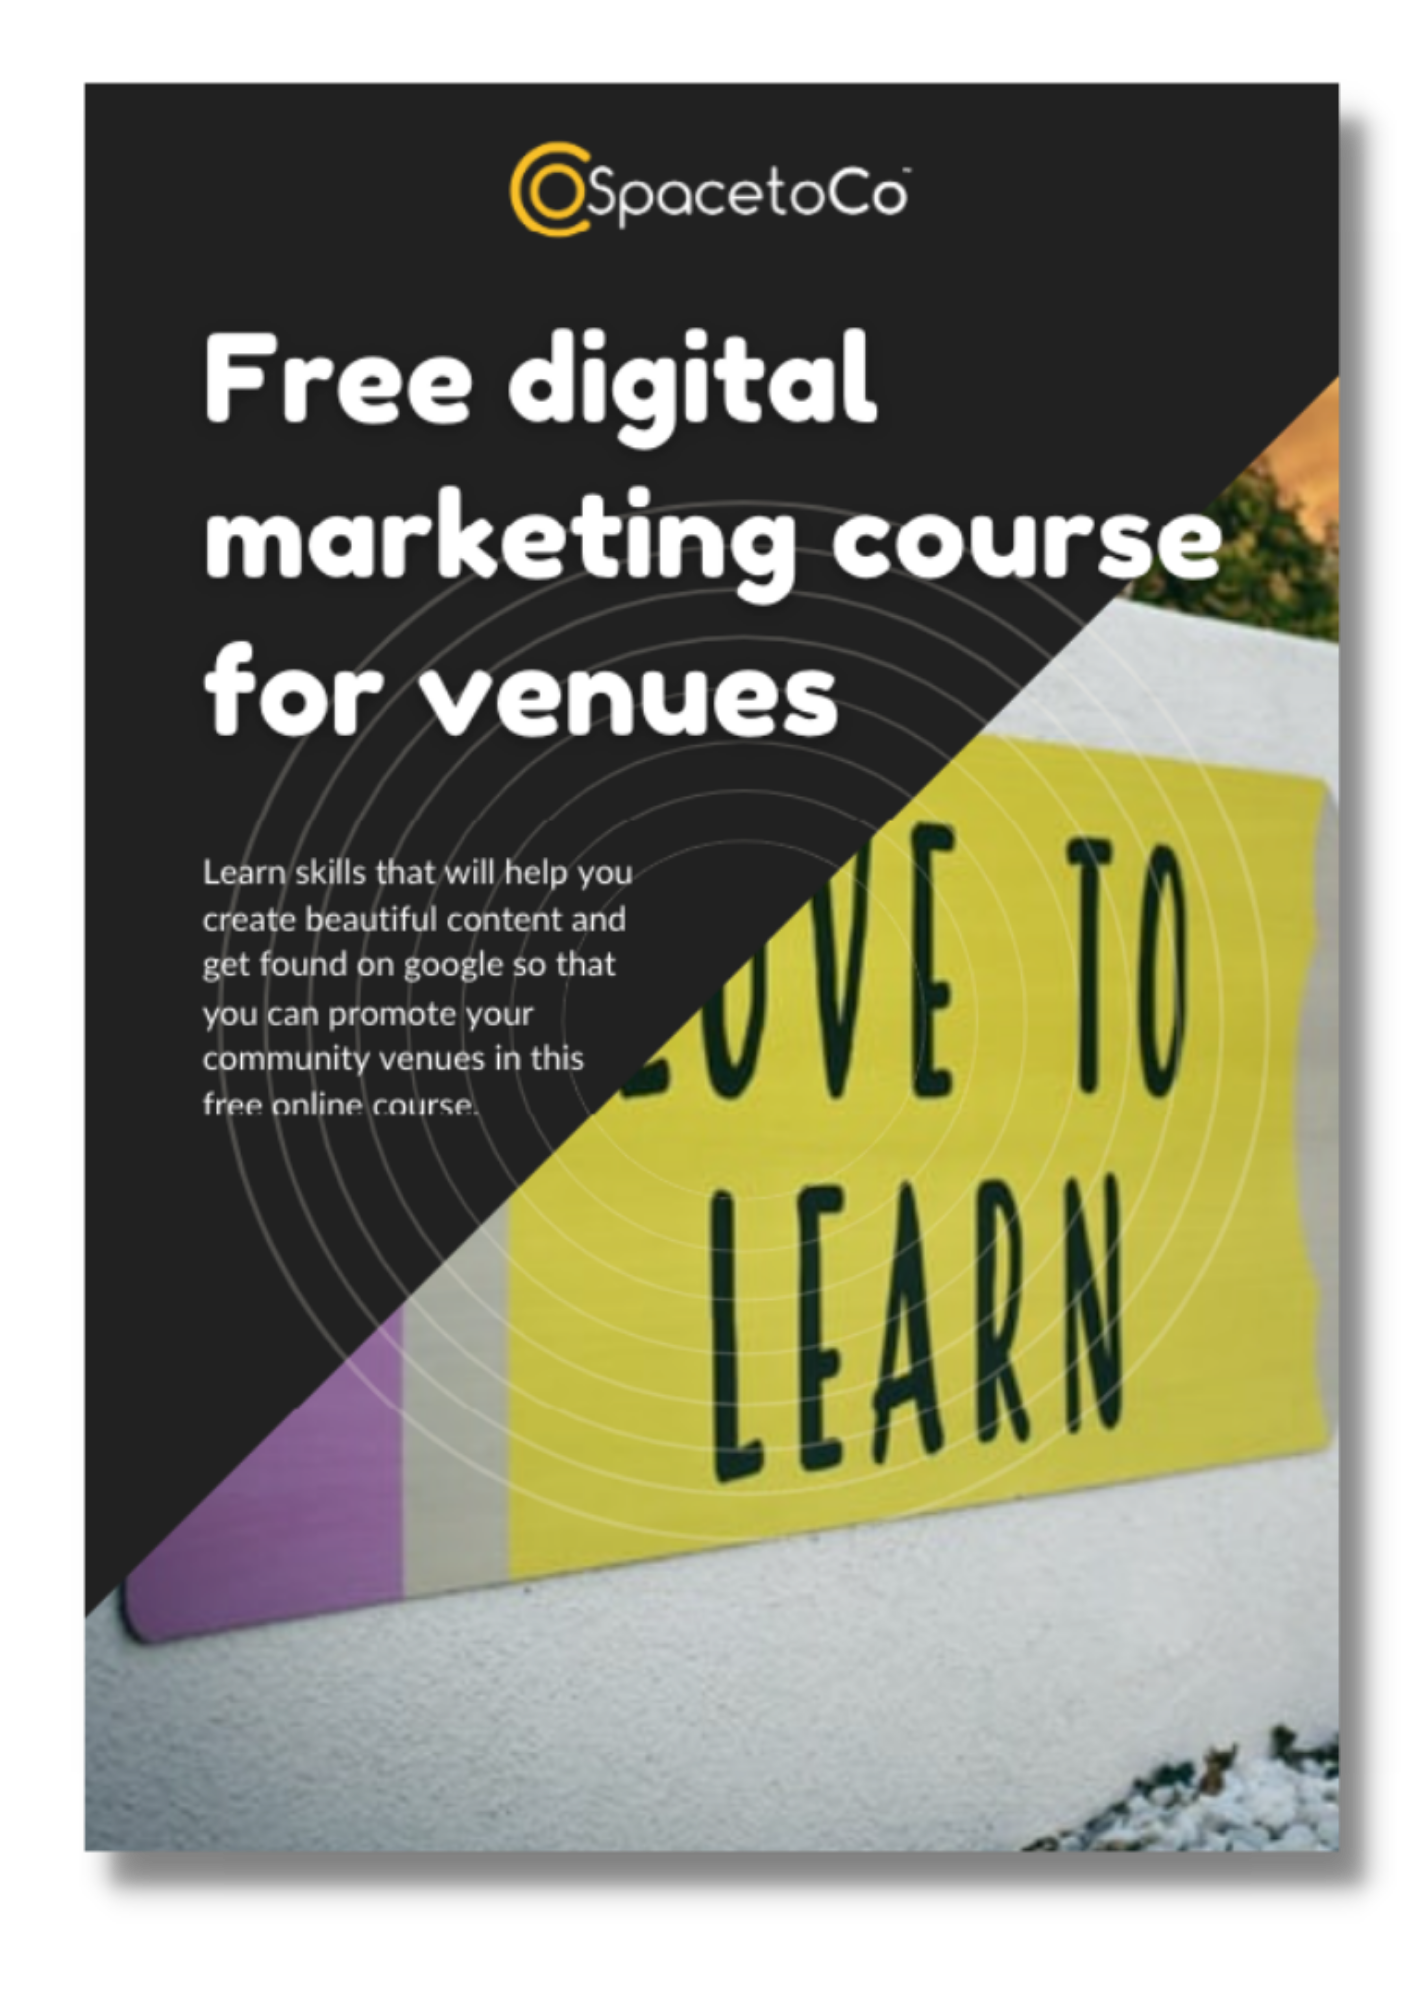 Free digital marketing and online skills course for community venues